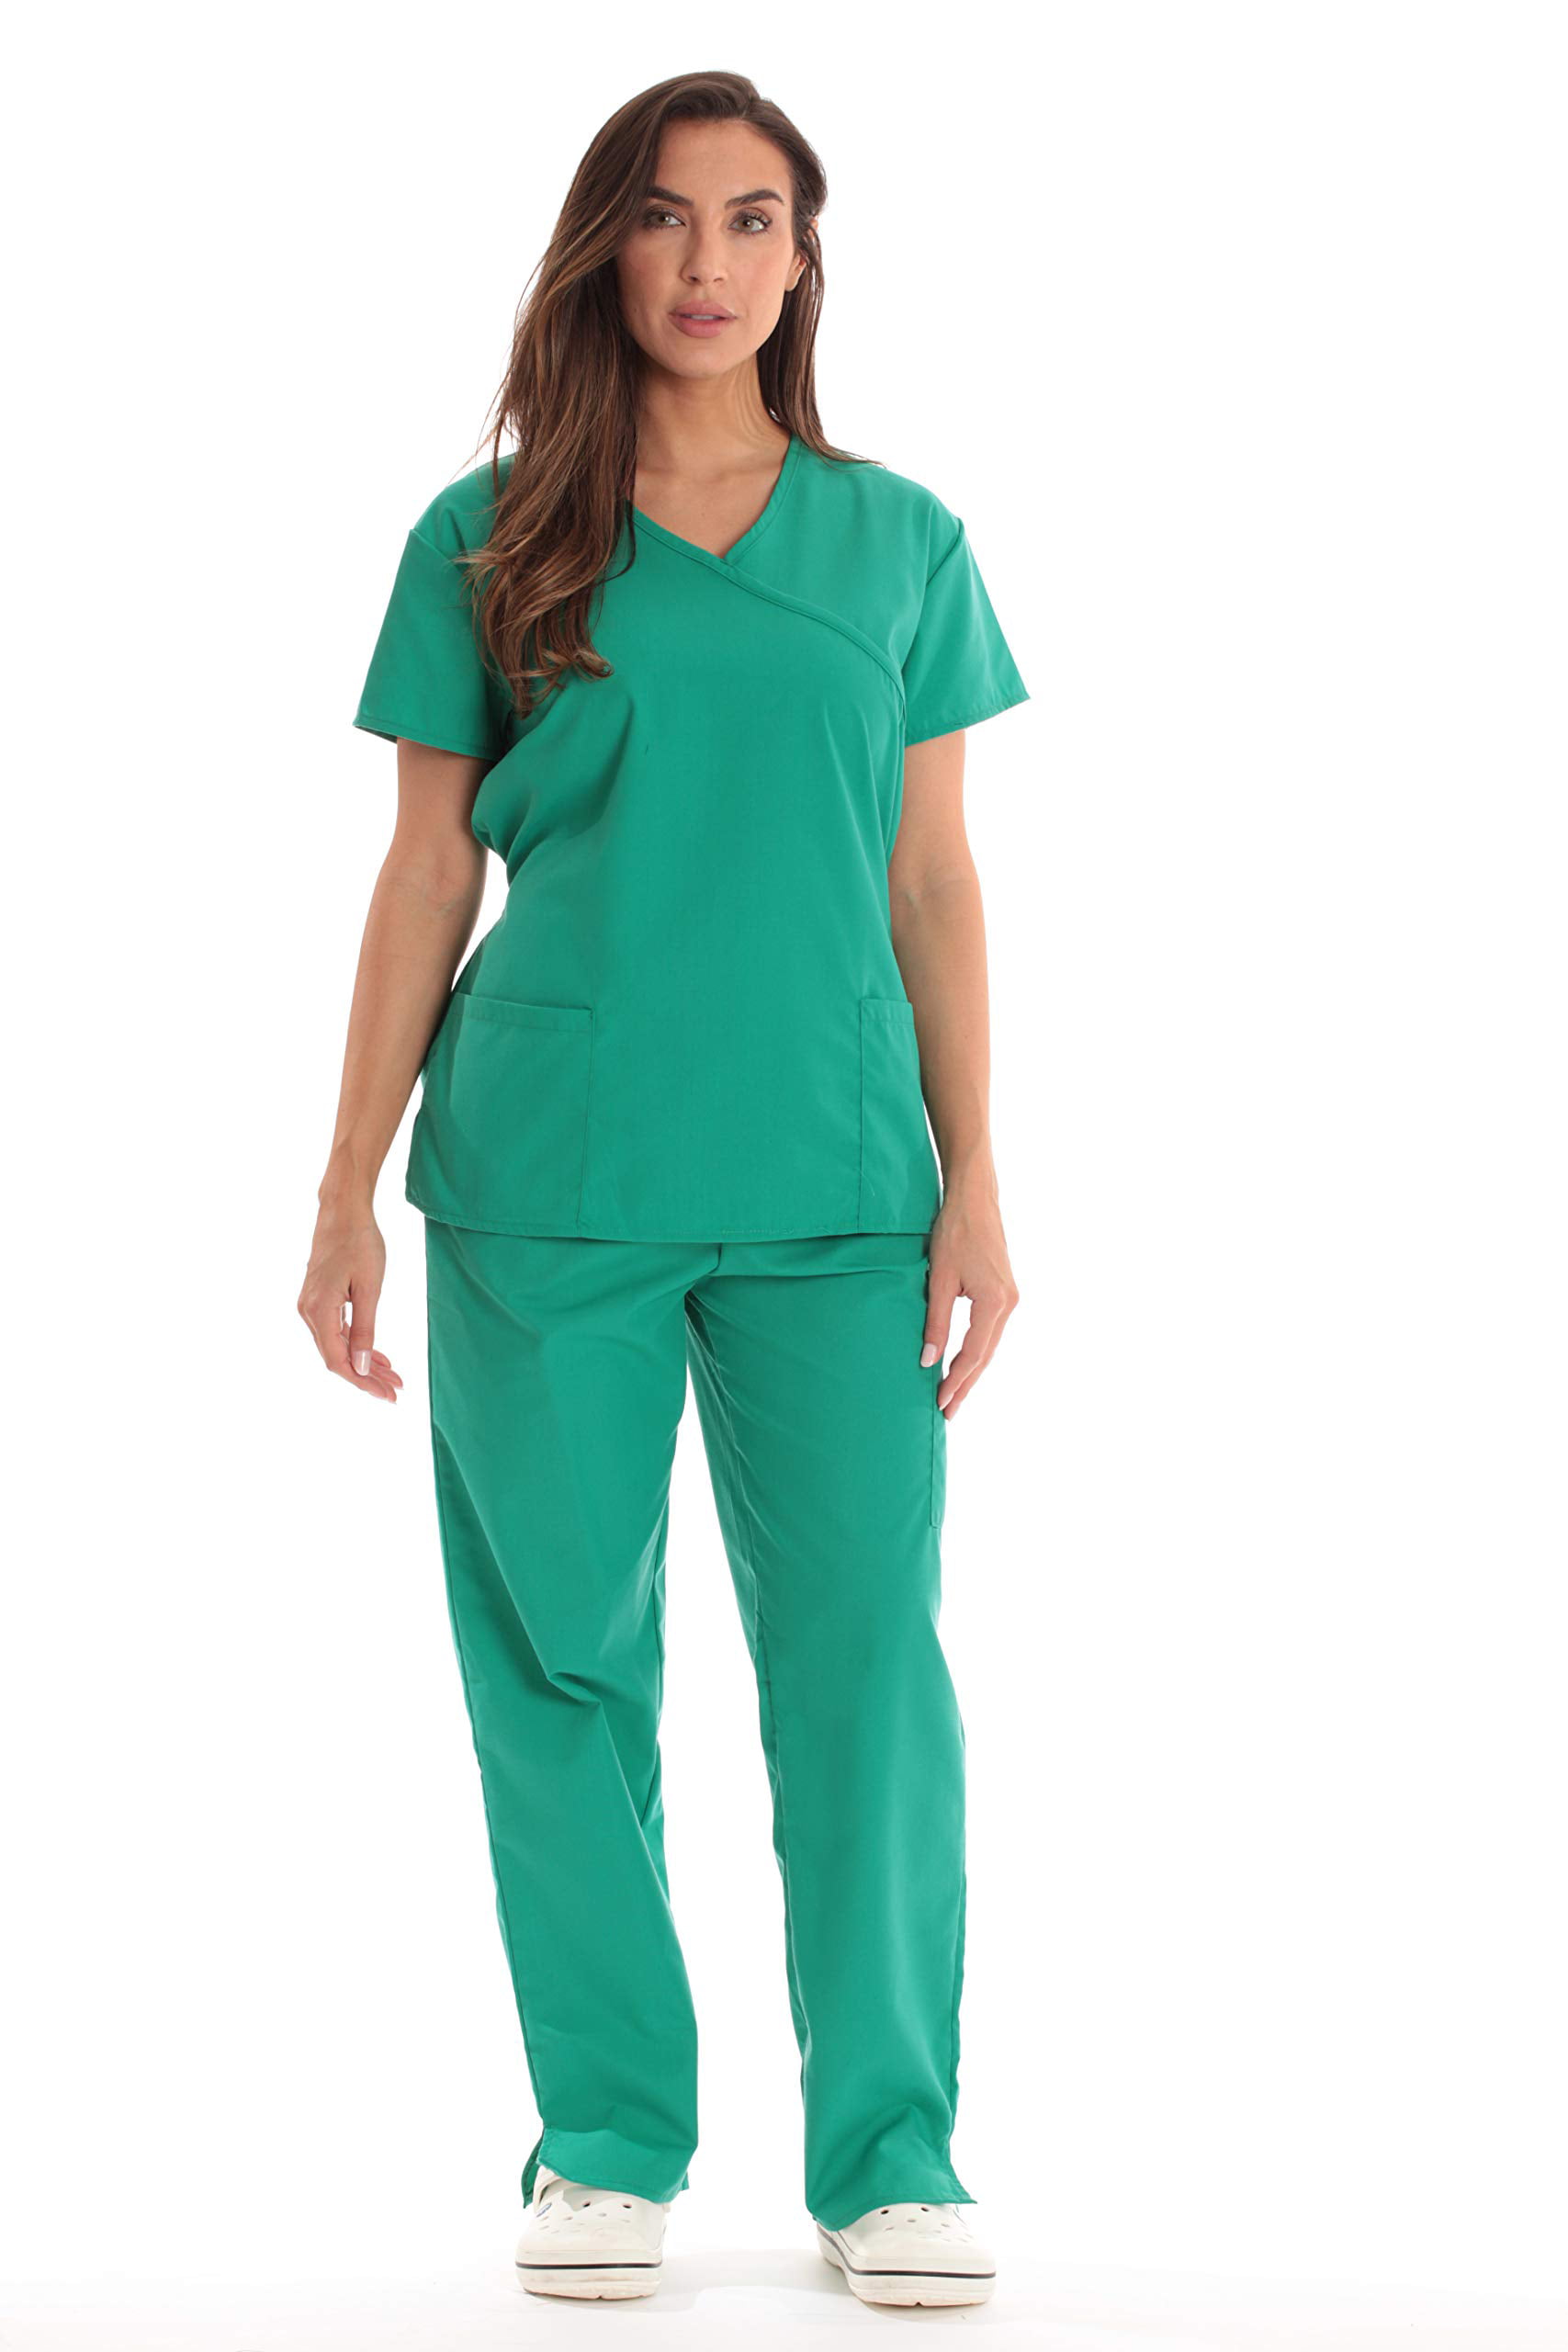 Just Love Women S Medical Scrub Sets Mock Wrap Scrubs With Comfortable Functionality Jade